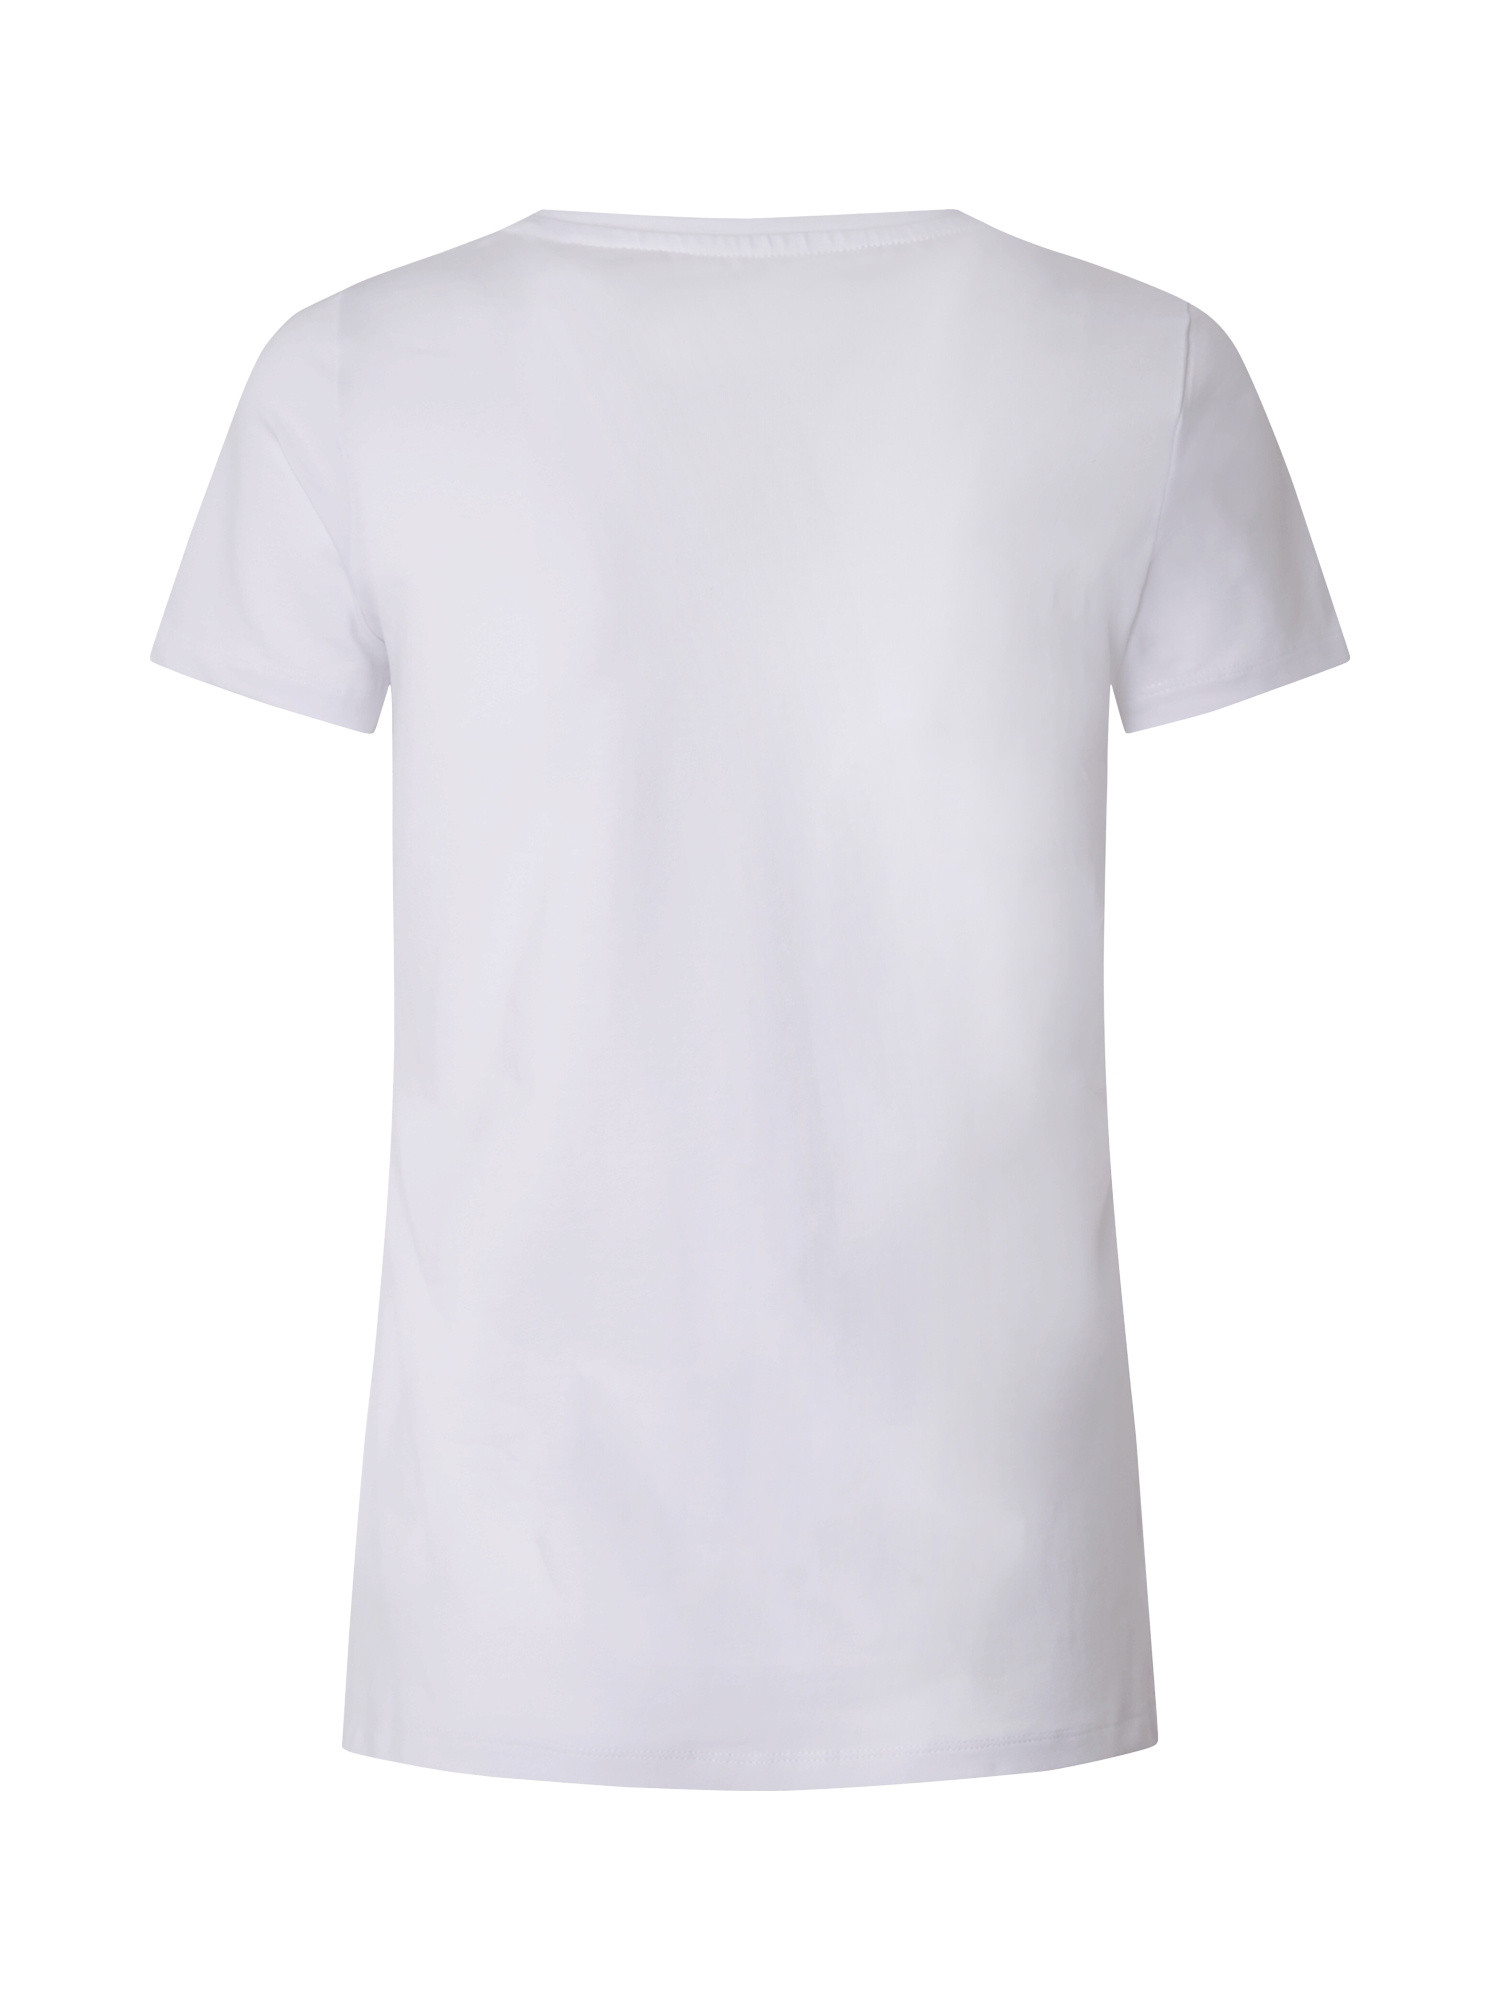 Pepe Jeans - T-shirt with print, White, large image number 1